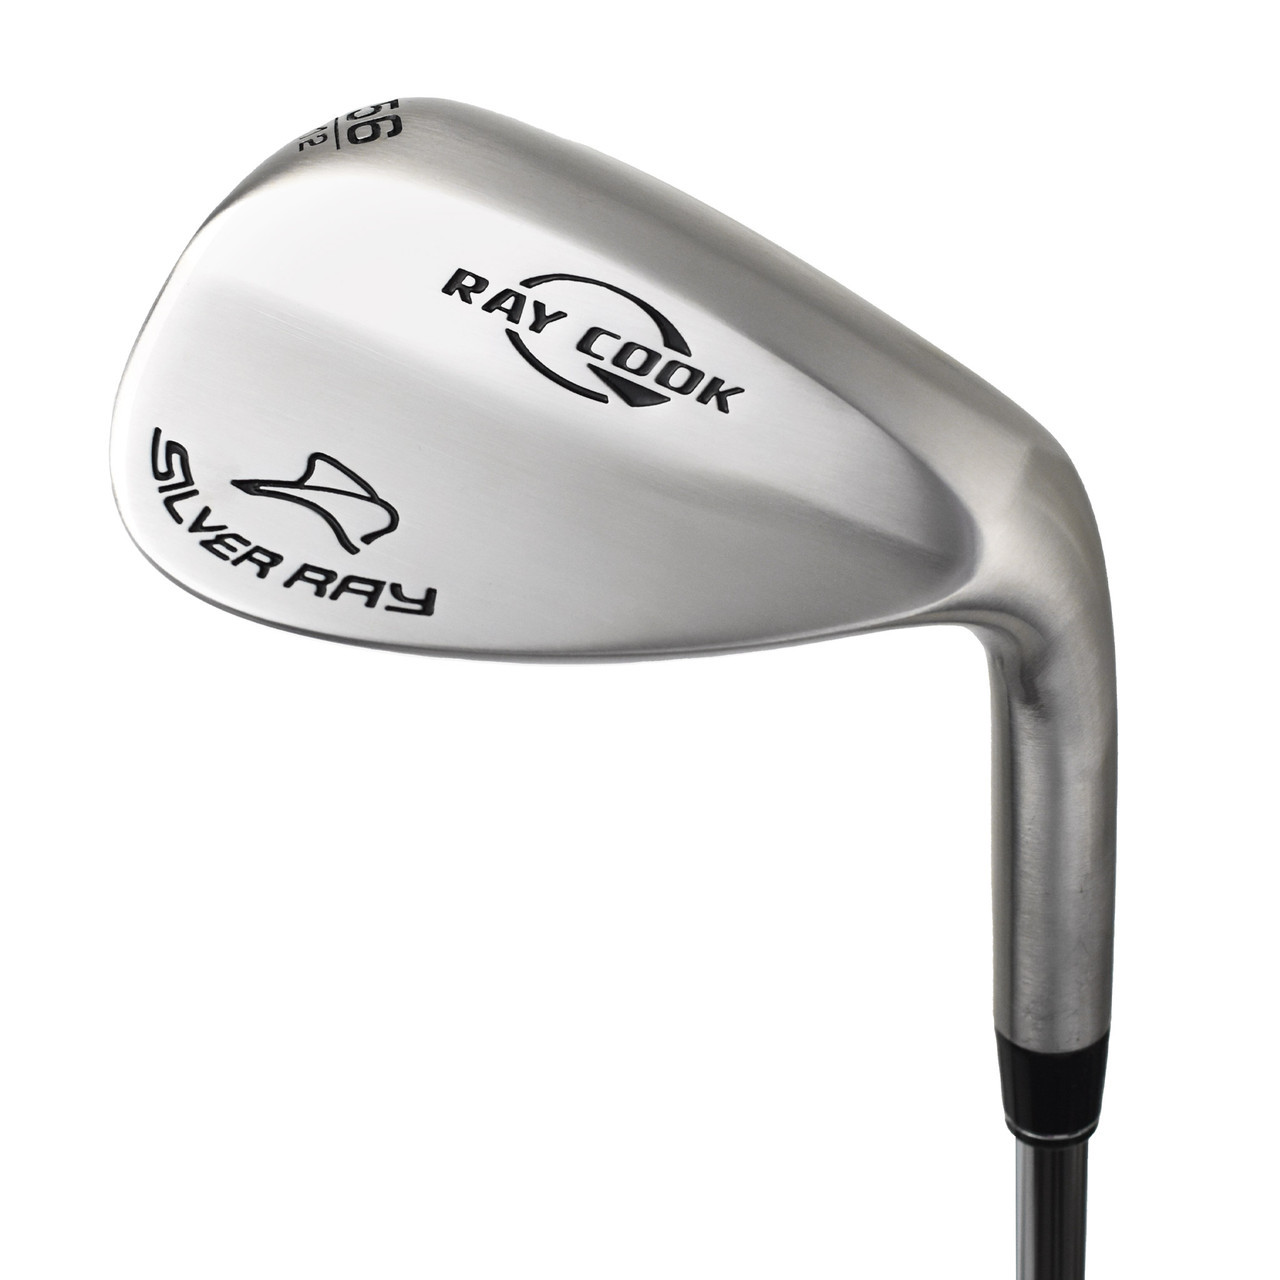 Silver Ray Wedge - Ray Cook Golf